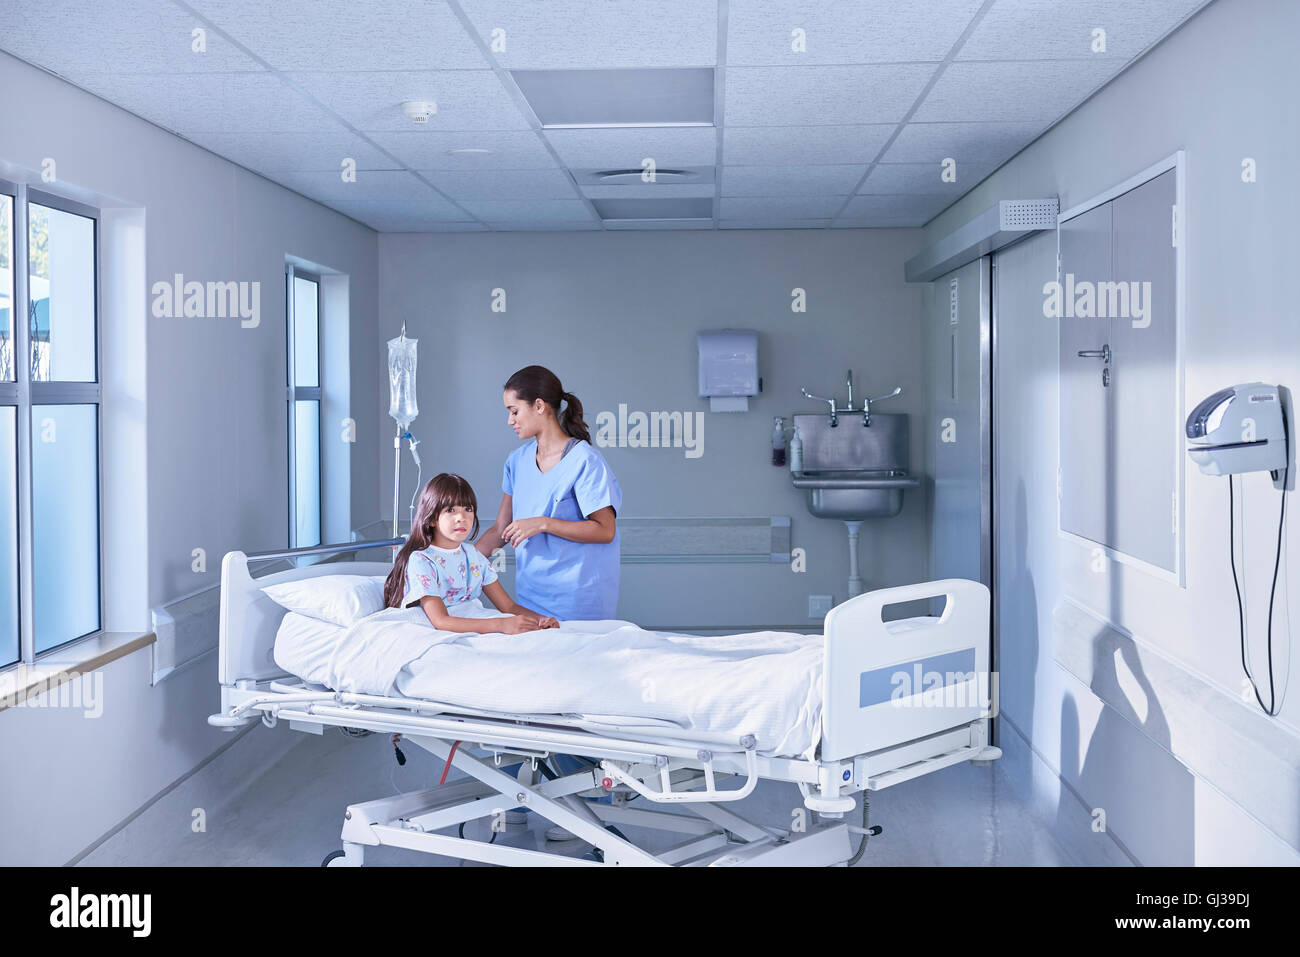 Nurse adjusting intravenous drip for girl patient in bed on hospital children's ward Stock Photo